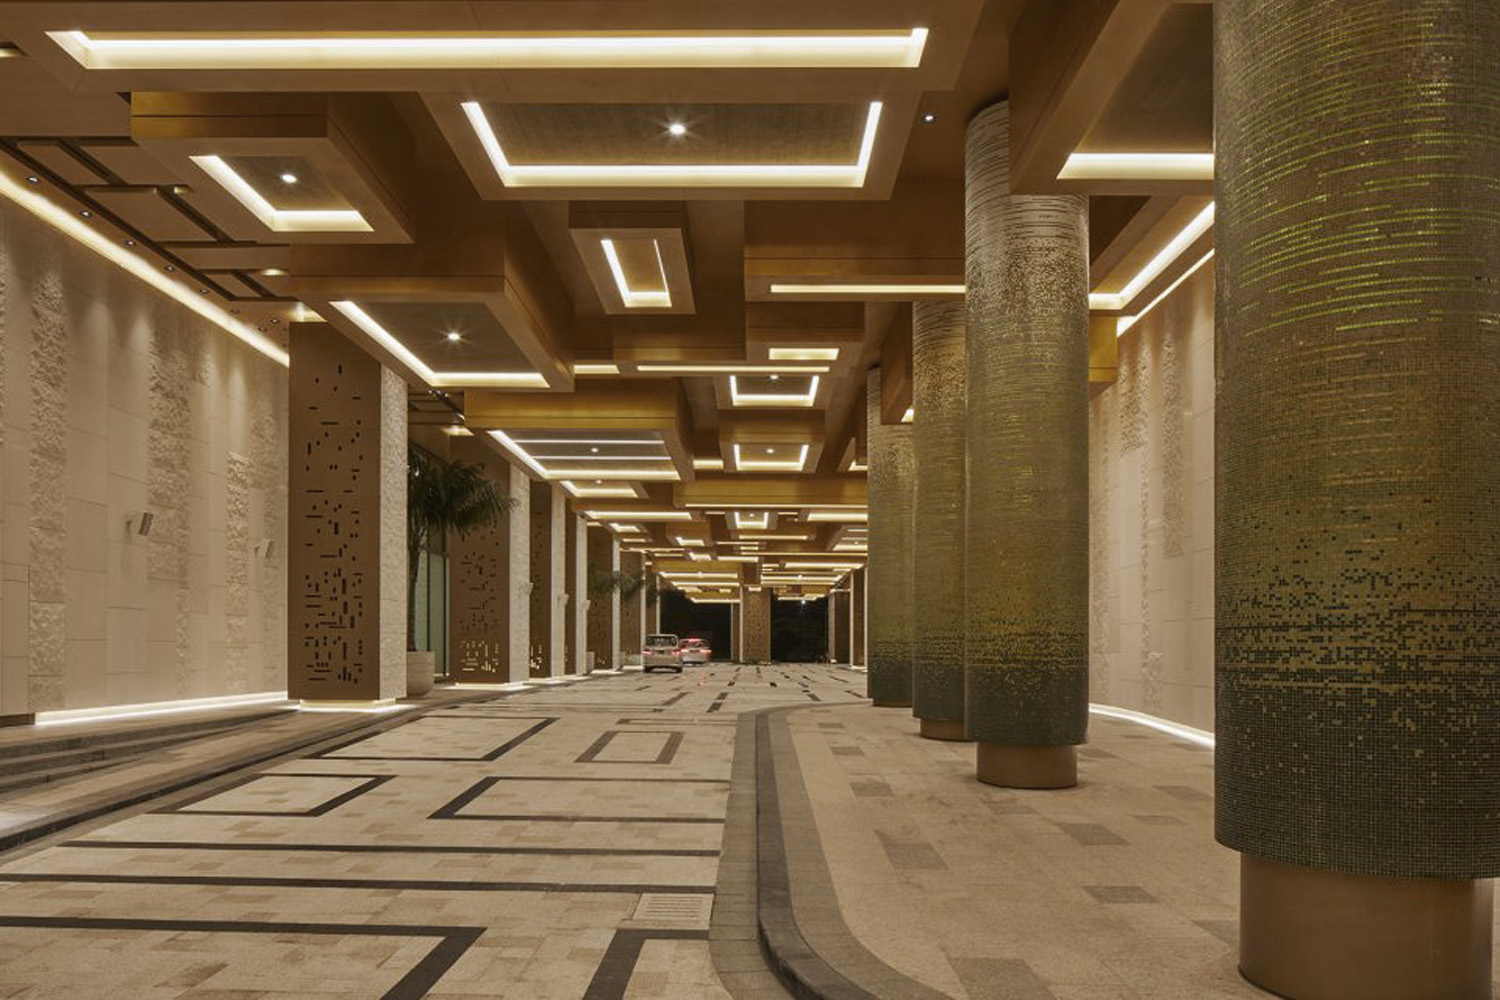 Space design of Hotel South Hall